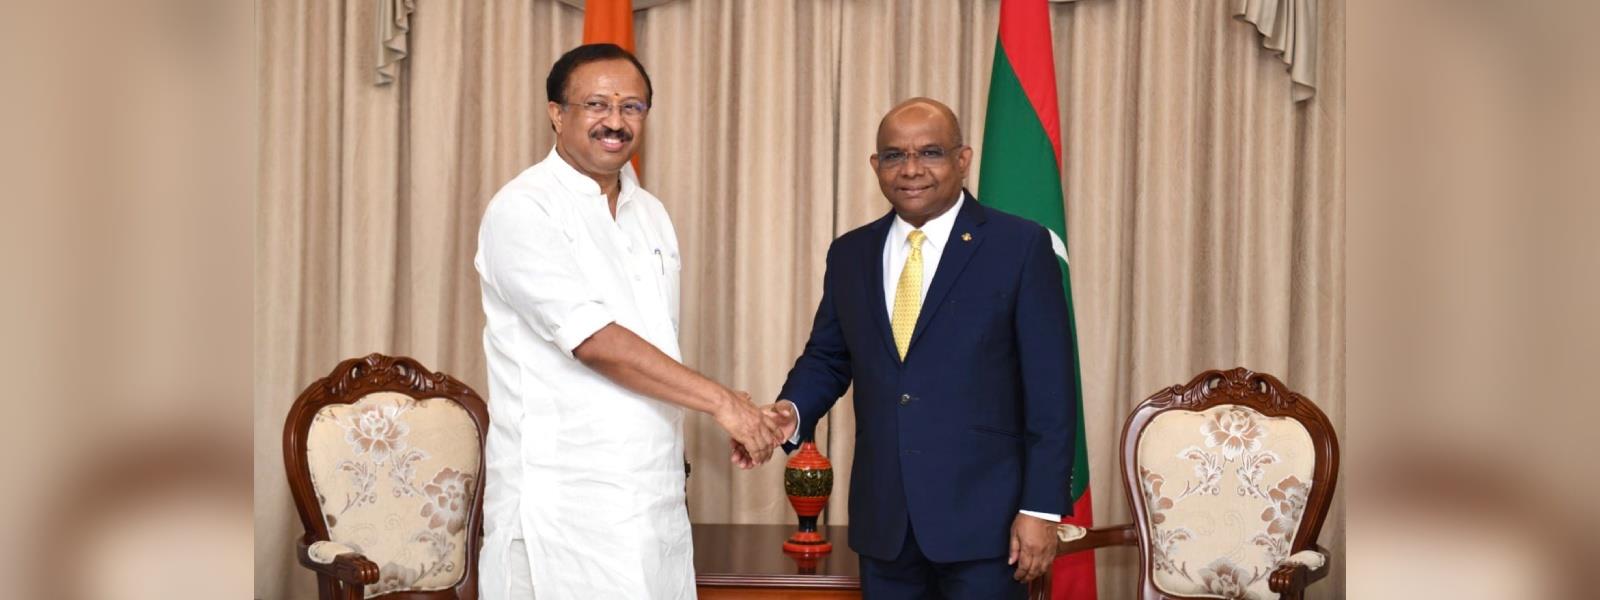 Minister of State for External Affairs Shri V. Muraleedharan met Minister of Foreign Affairs of Maldives H.E. Mr. Abdulla Shahid in Male